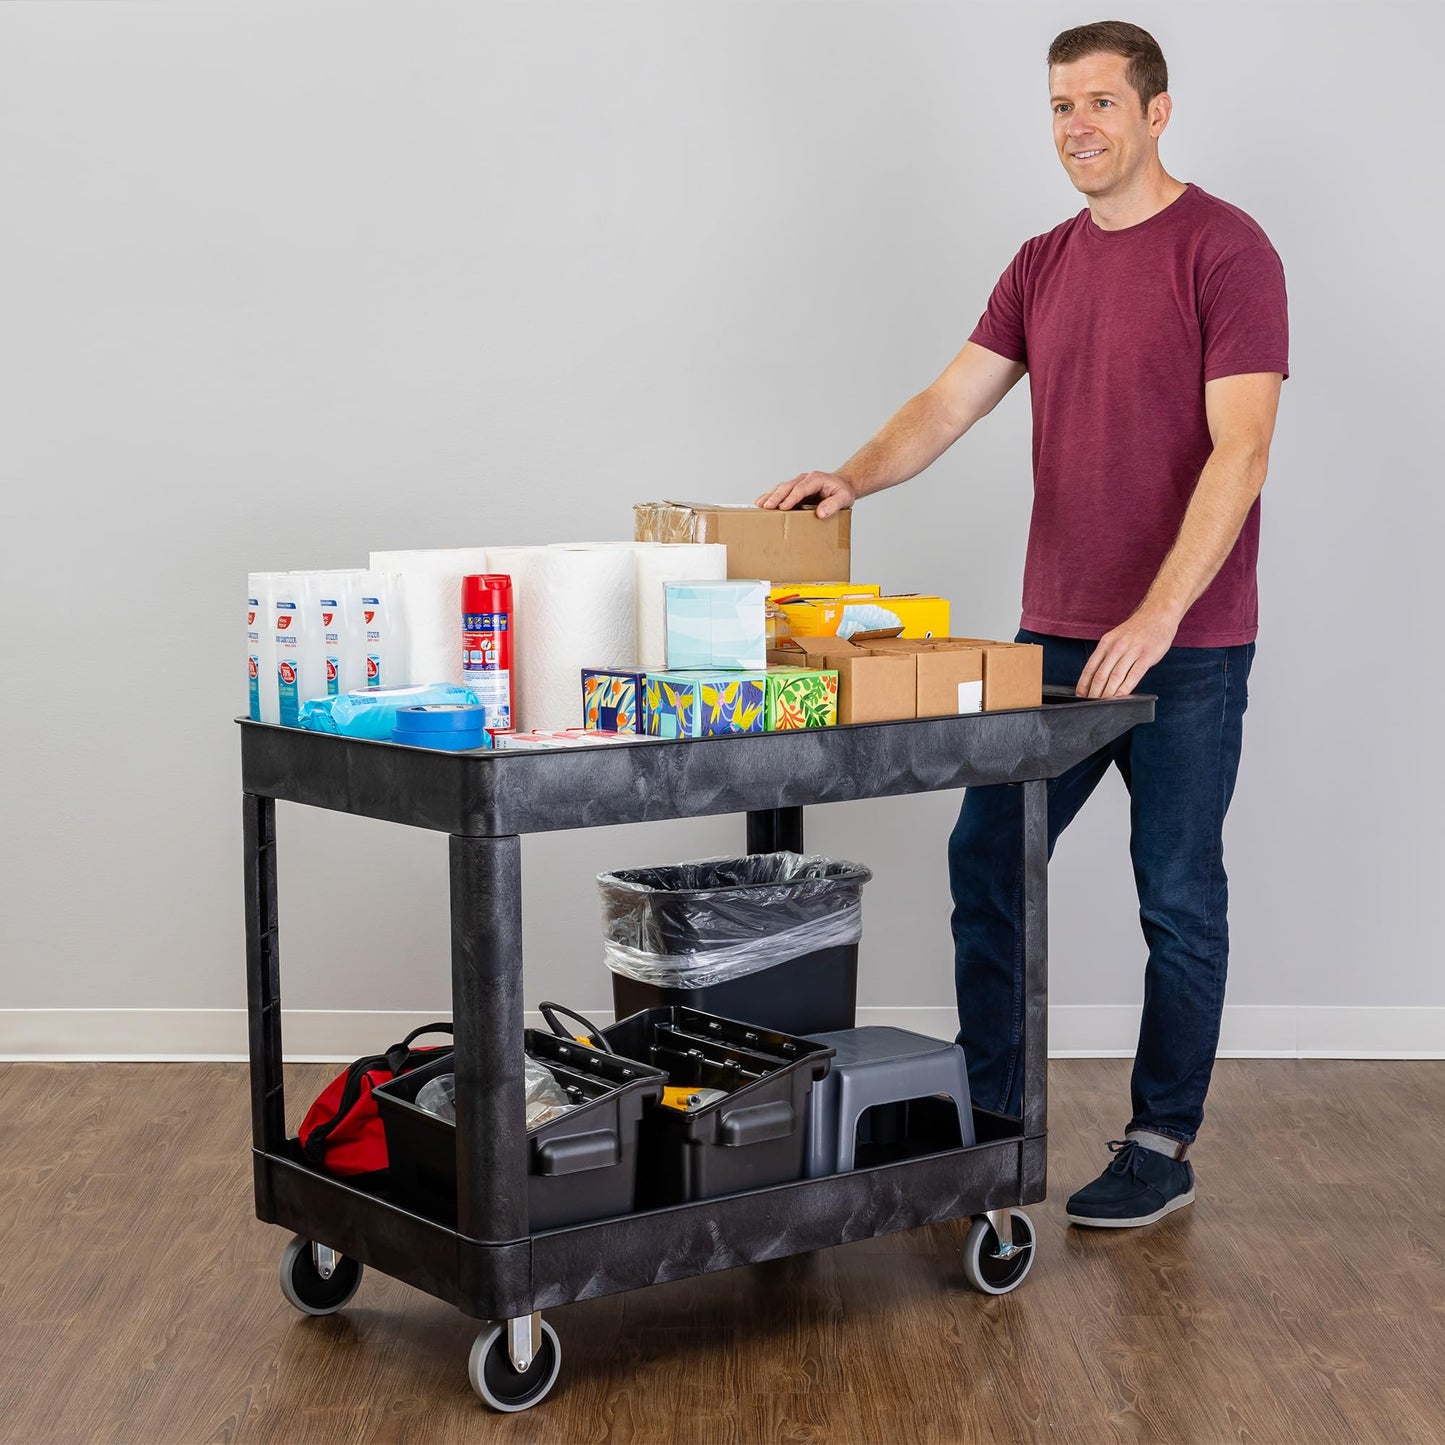 Stand Steady Original Tubstr Extra Large Two Shelf Utility Service Cart - Supports up to 500 lbs., Heavy-Duty Rolling Service Cart for Warehouse,